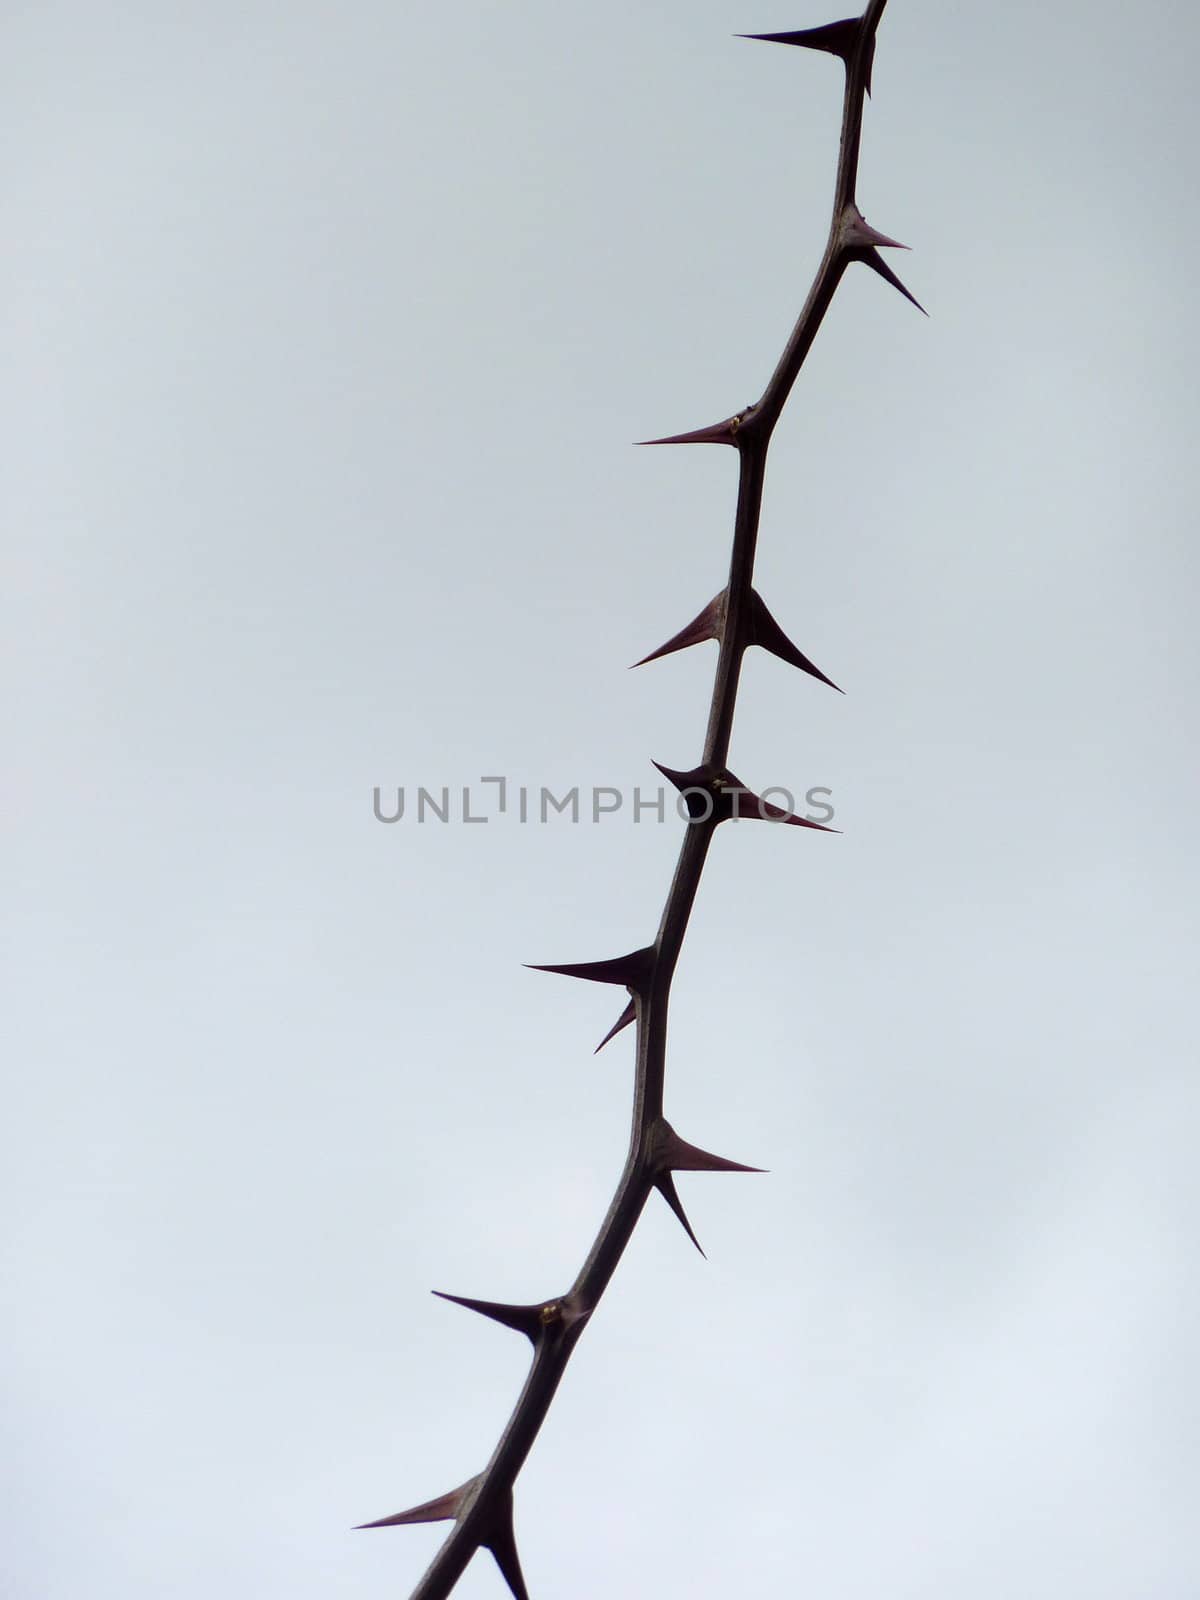 Twig with thorns, isolated on cloudy sky